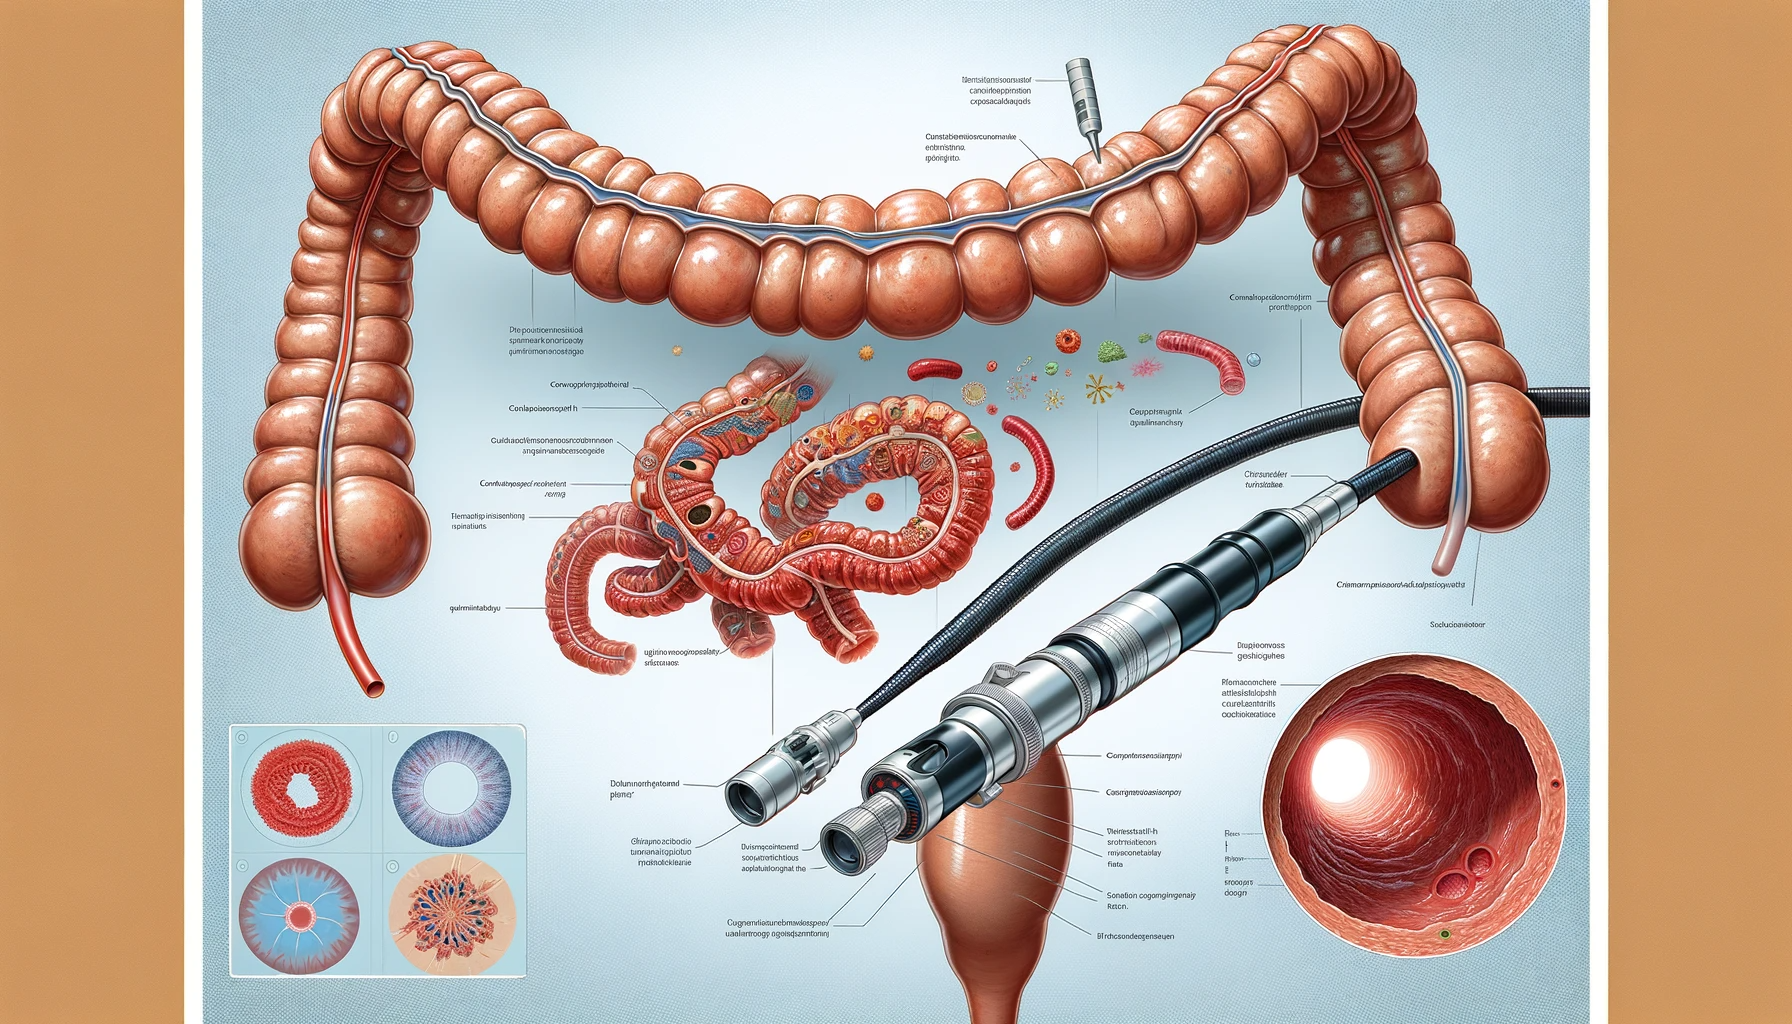 DALL·E 2023-12-12 09.34.35 - A detailed illustration of a Colonoscopy procedure. The image visually captures the anatomy and process involved in a Colonoscopy. It shows a person's.png